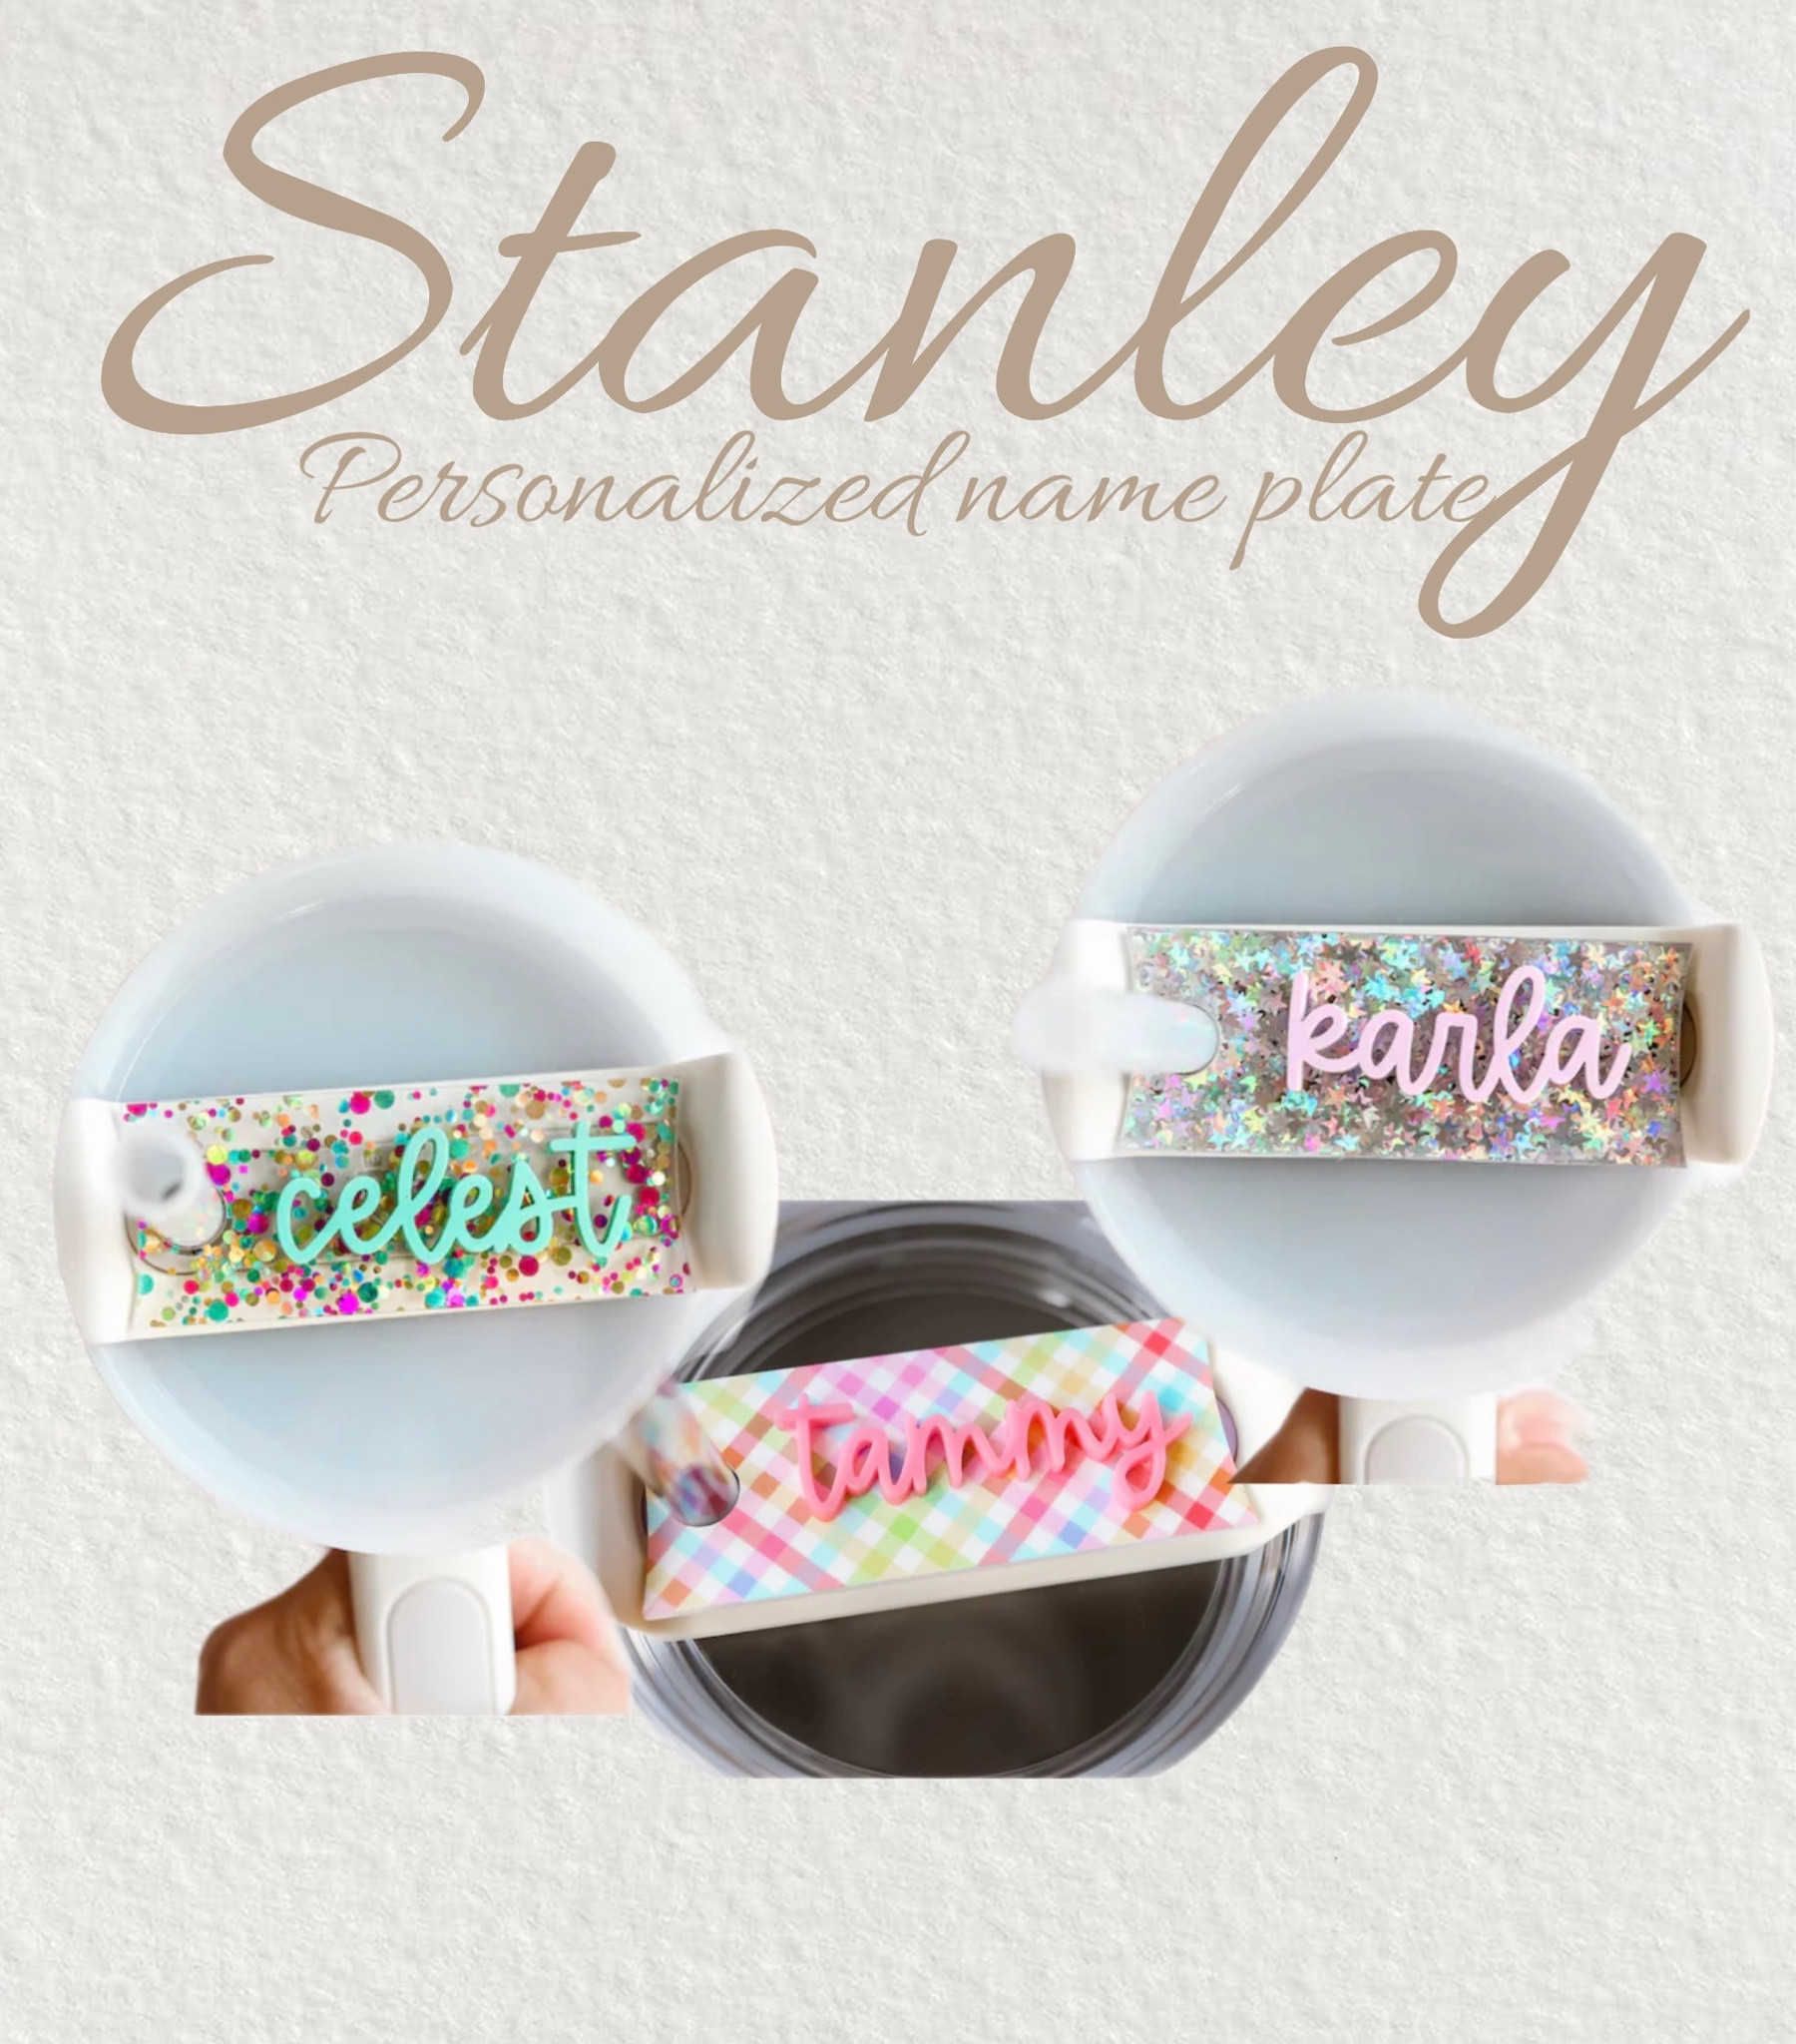 Stanley Name Plate.